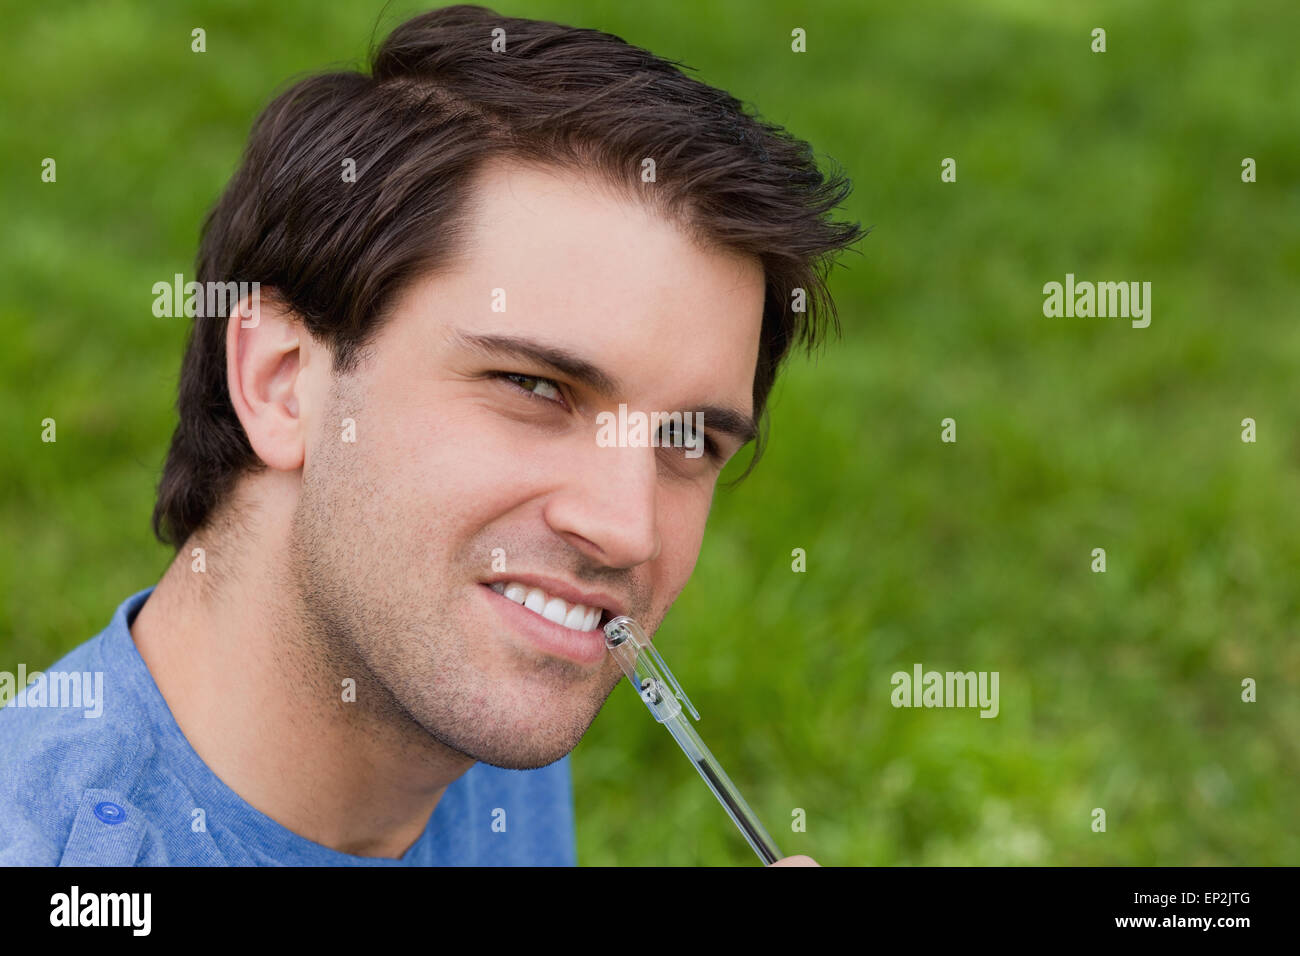 Young thoughtful man looking at the camera while holding his pen Stock Photo